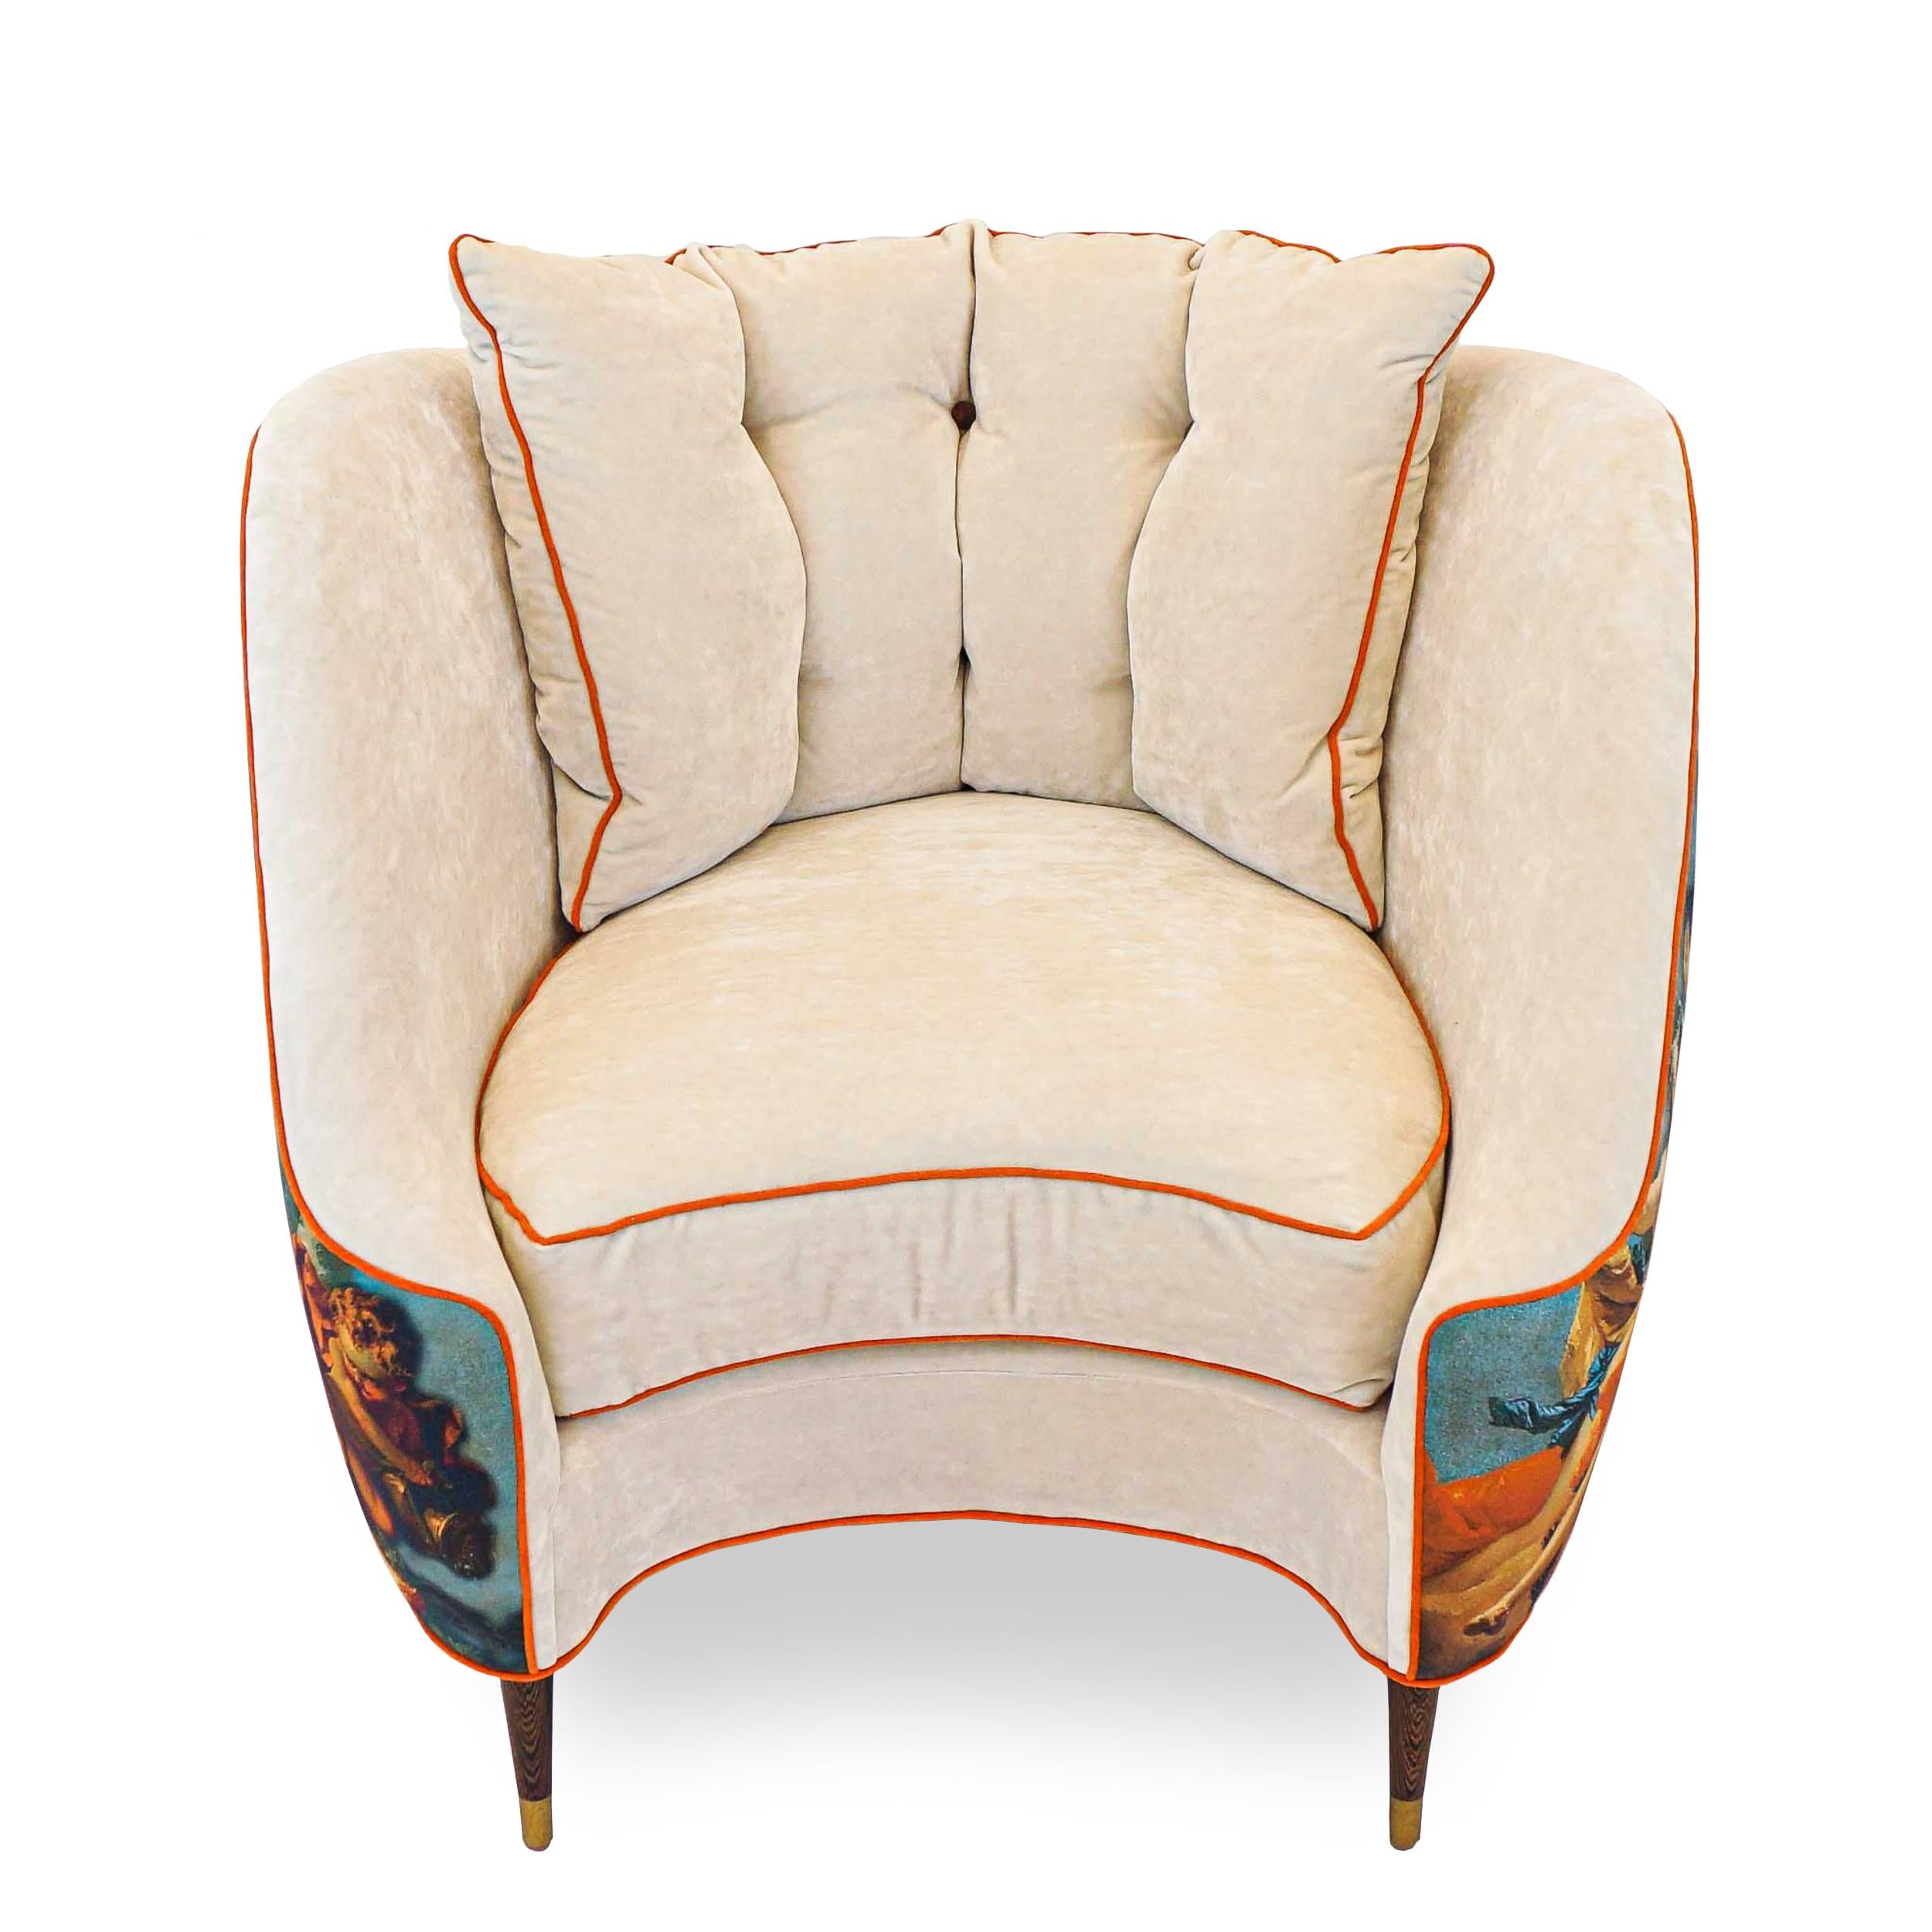 Venus Painting Bucket Style Chair with Velvet Interior In New Condition For Sale In Greenwich, CT